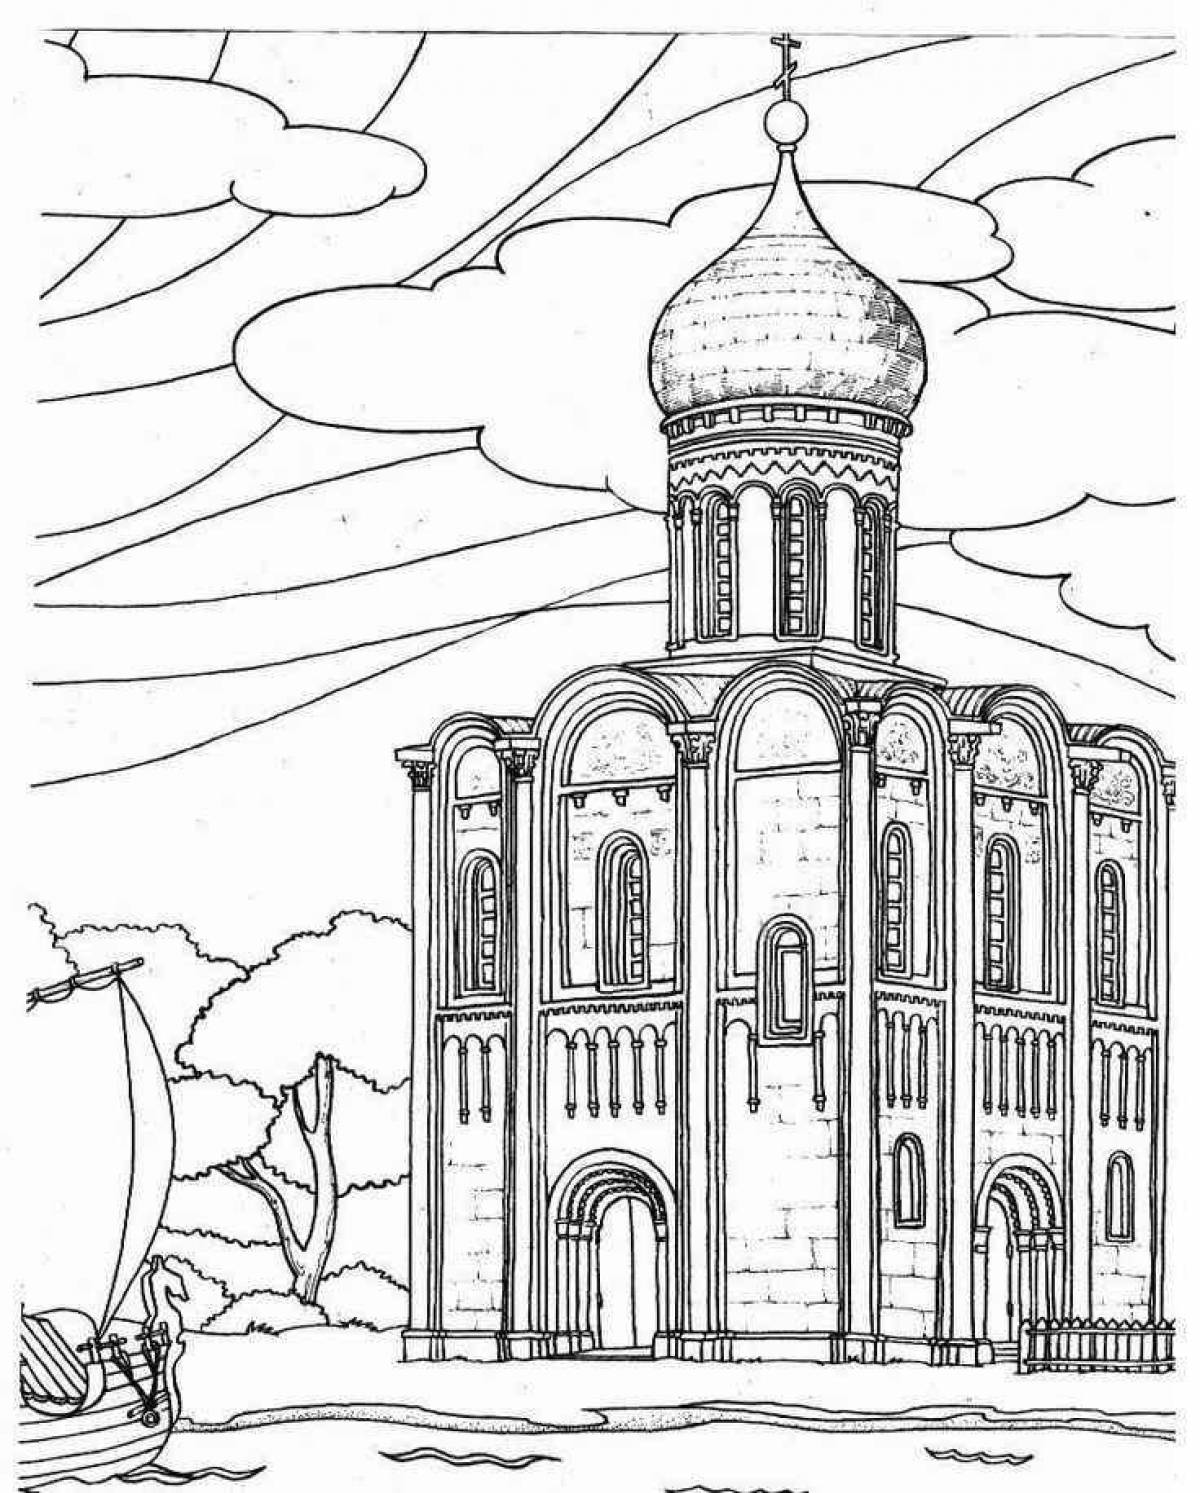 Drawing of a large church